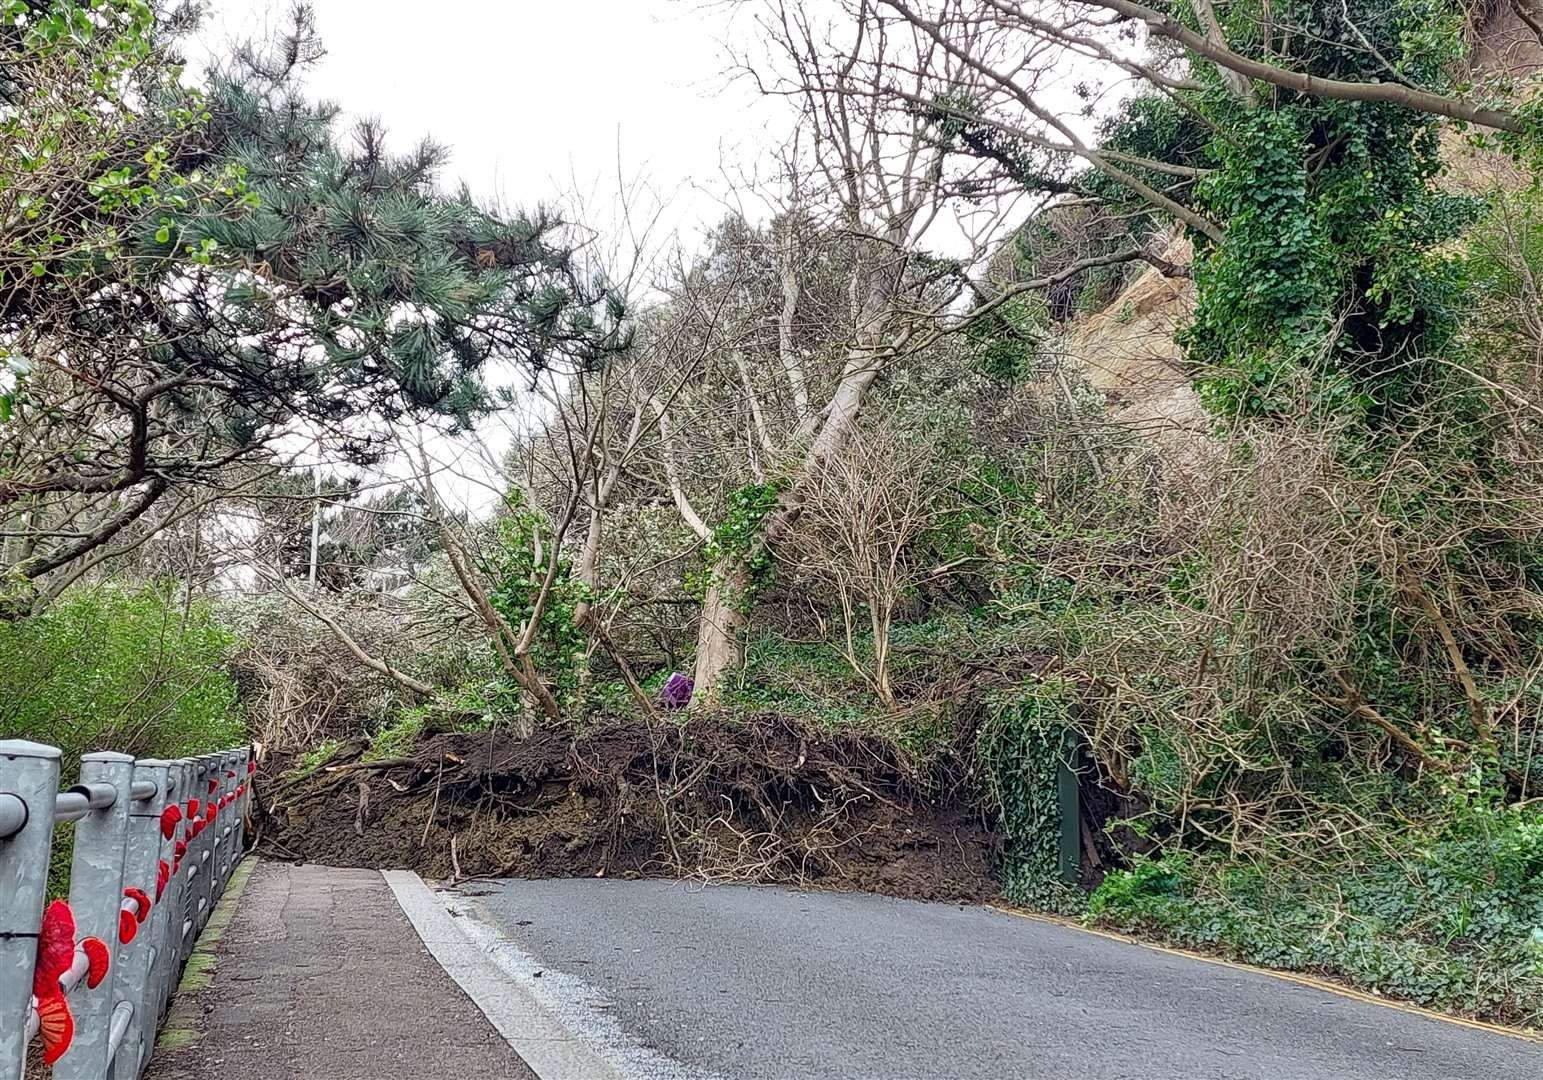 The Road of Remembrance, Folkestone has once again been blocked by debris